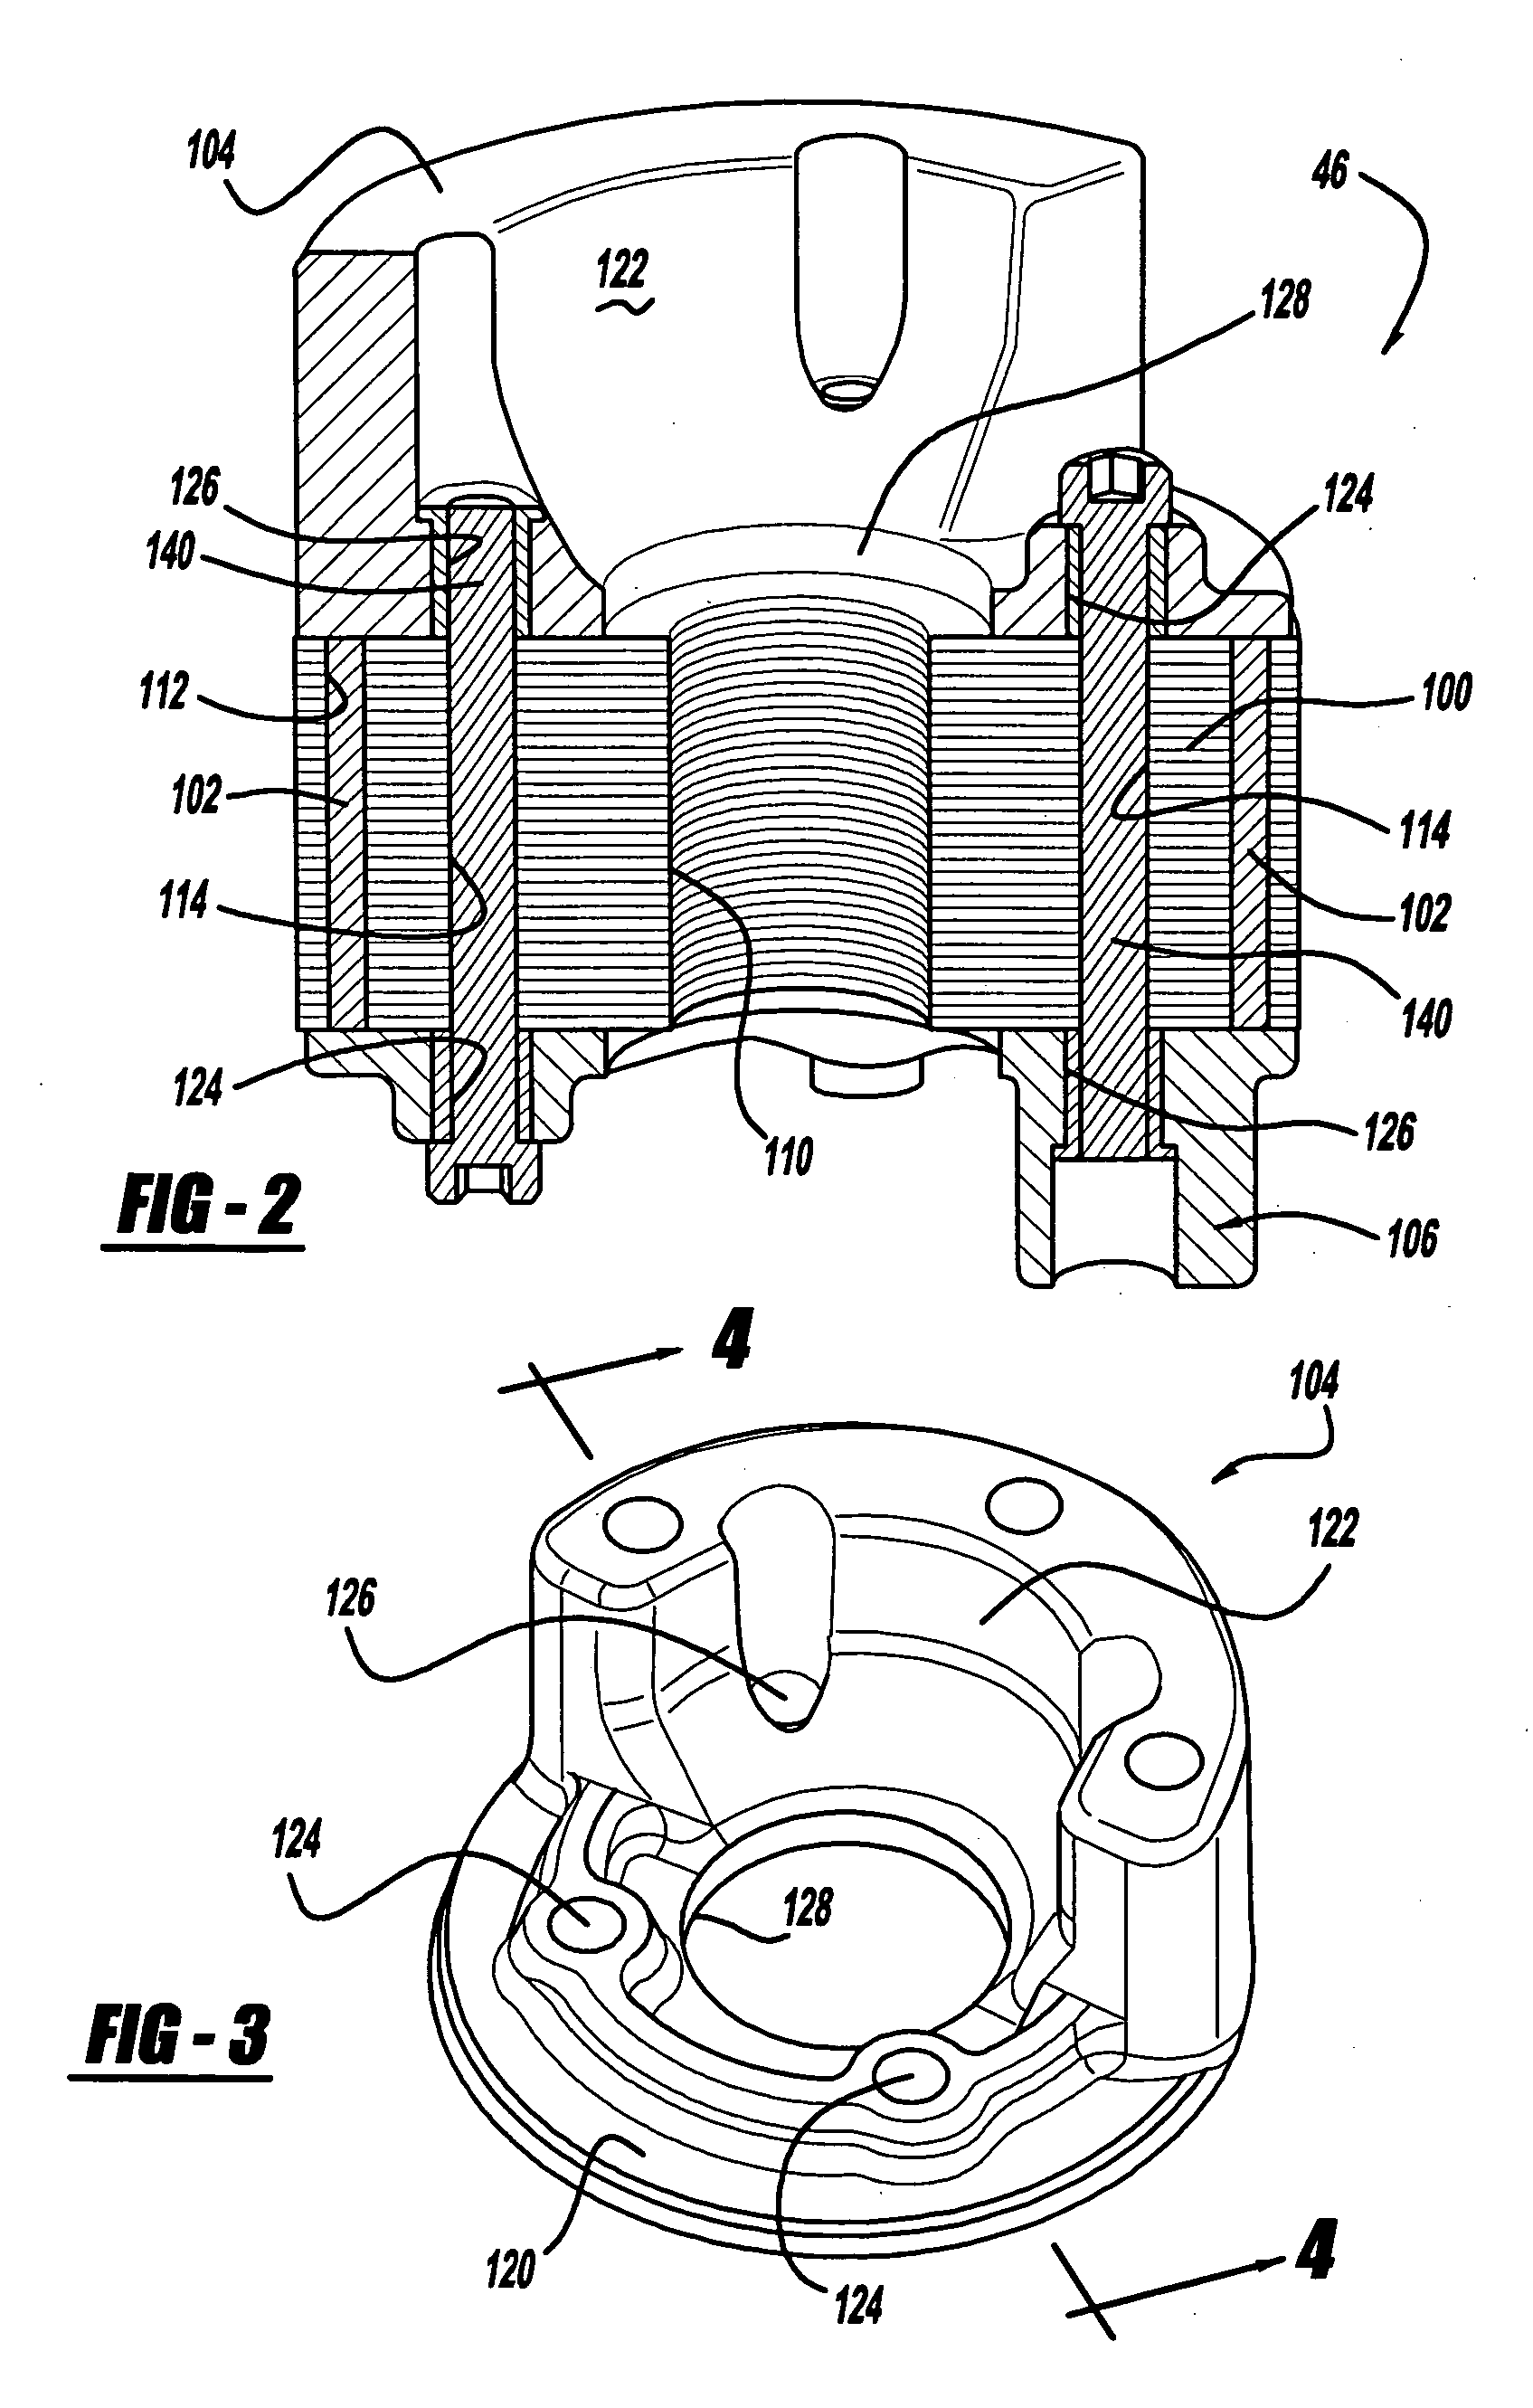 Scroll machine with brushless permanent magnet motor